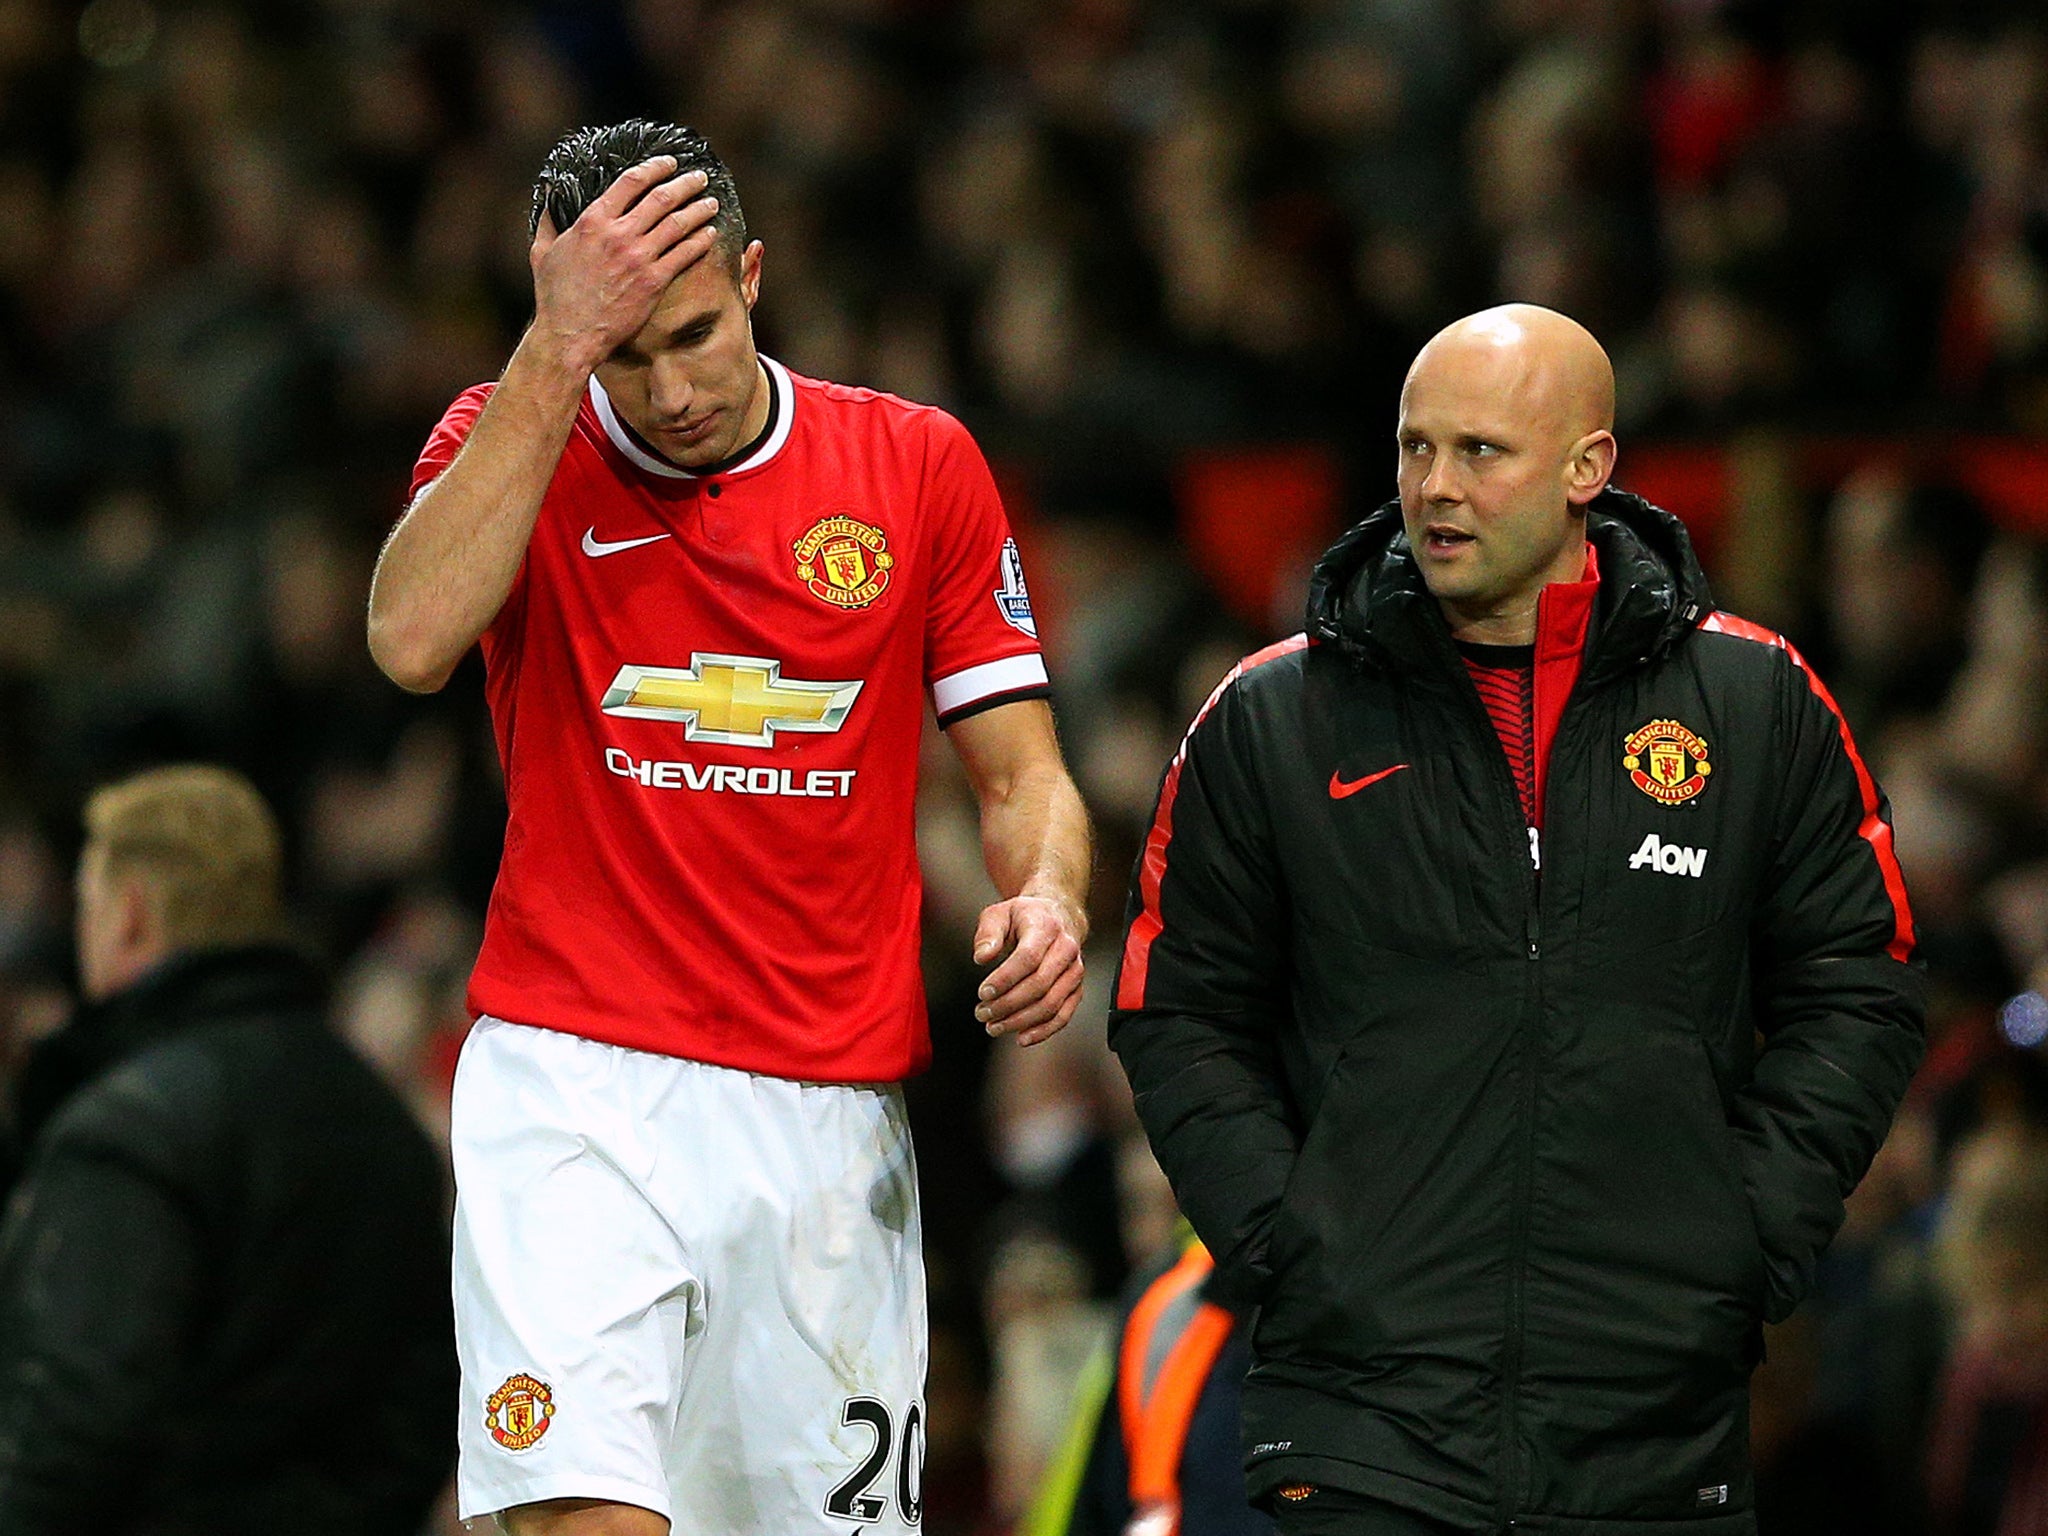 Van Persie picked up an injury in the defeat to Southampton